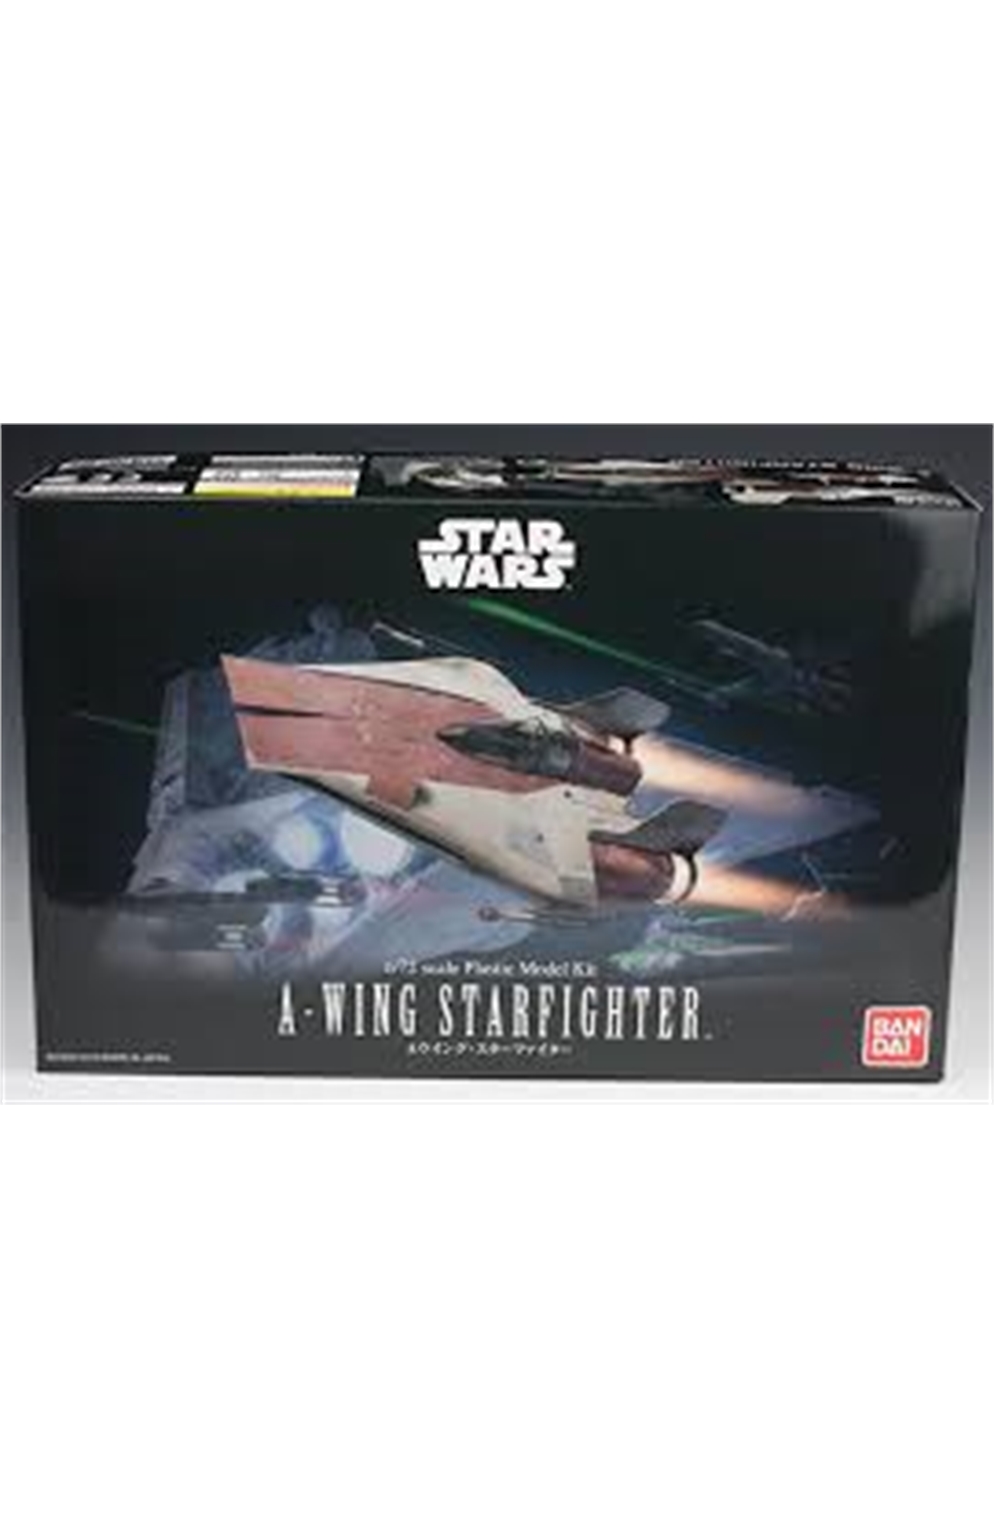 Star Wars A-Wing Starfighter 1/72 Scale